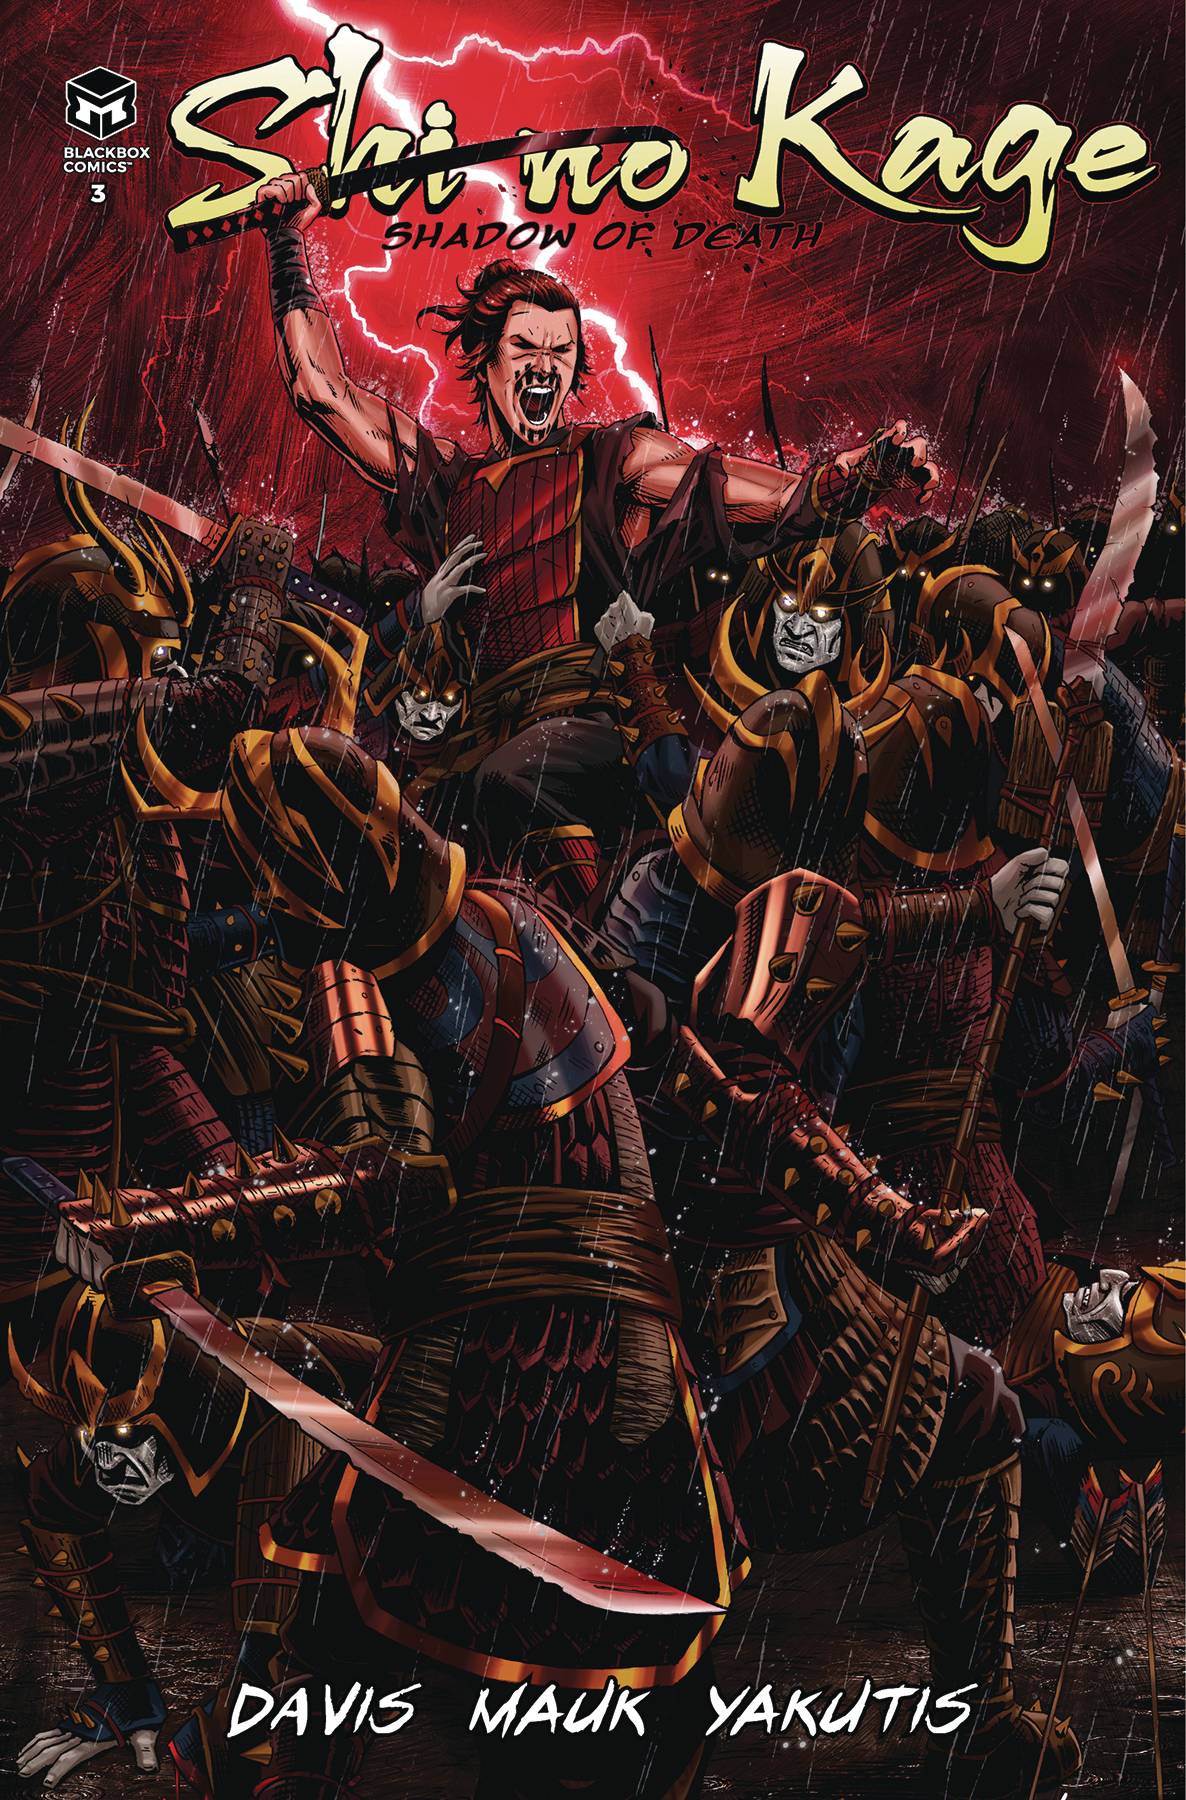 Shi no Kage comic book cover red and black